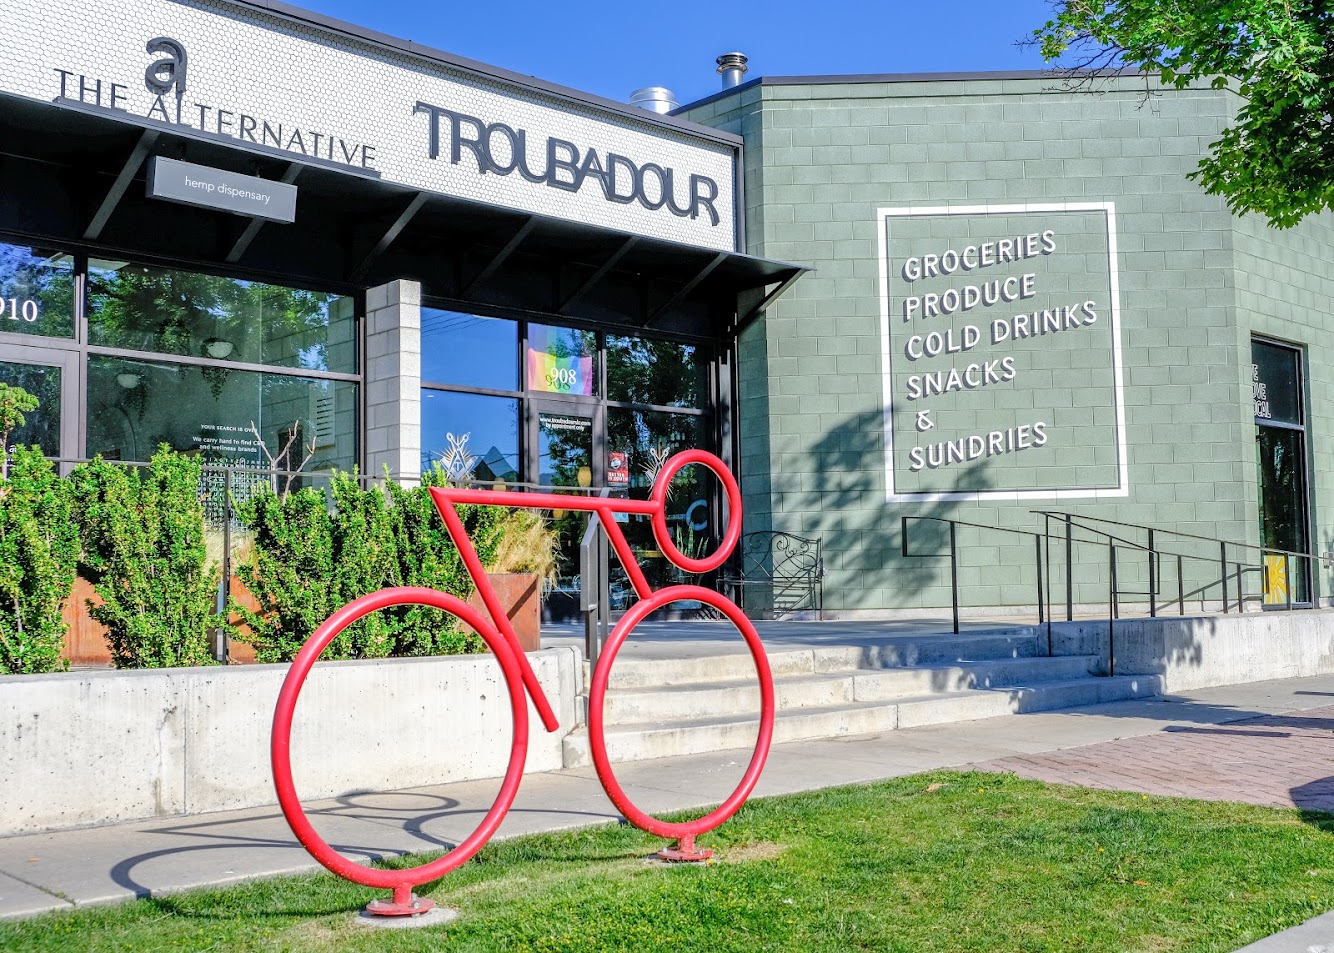 A photo of a red bicycle-shaped bike rack.